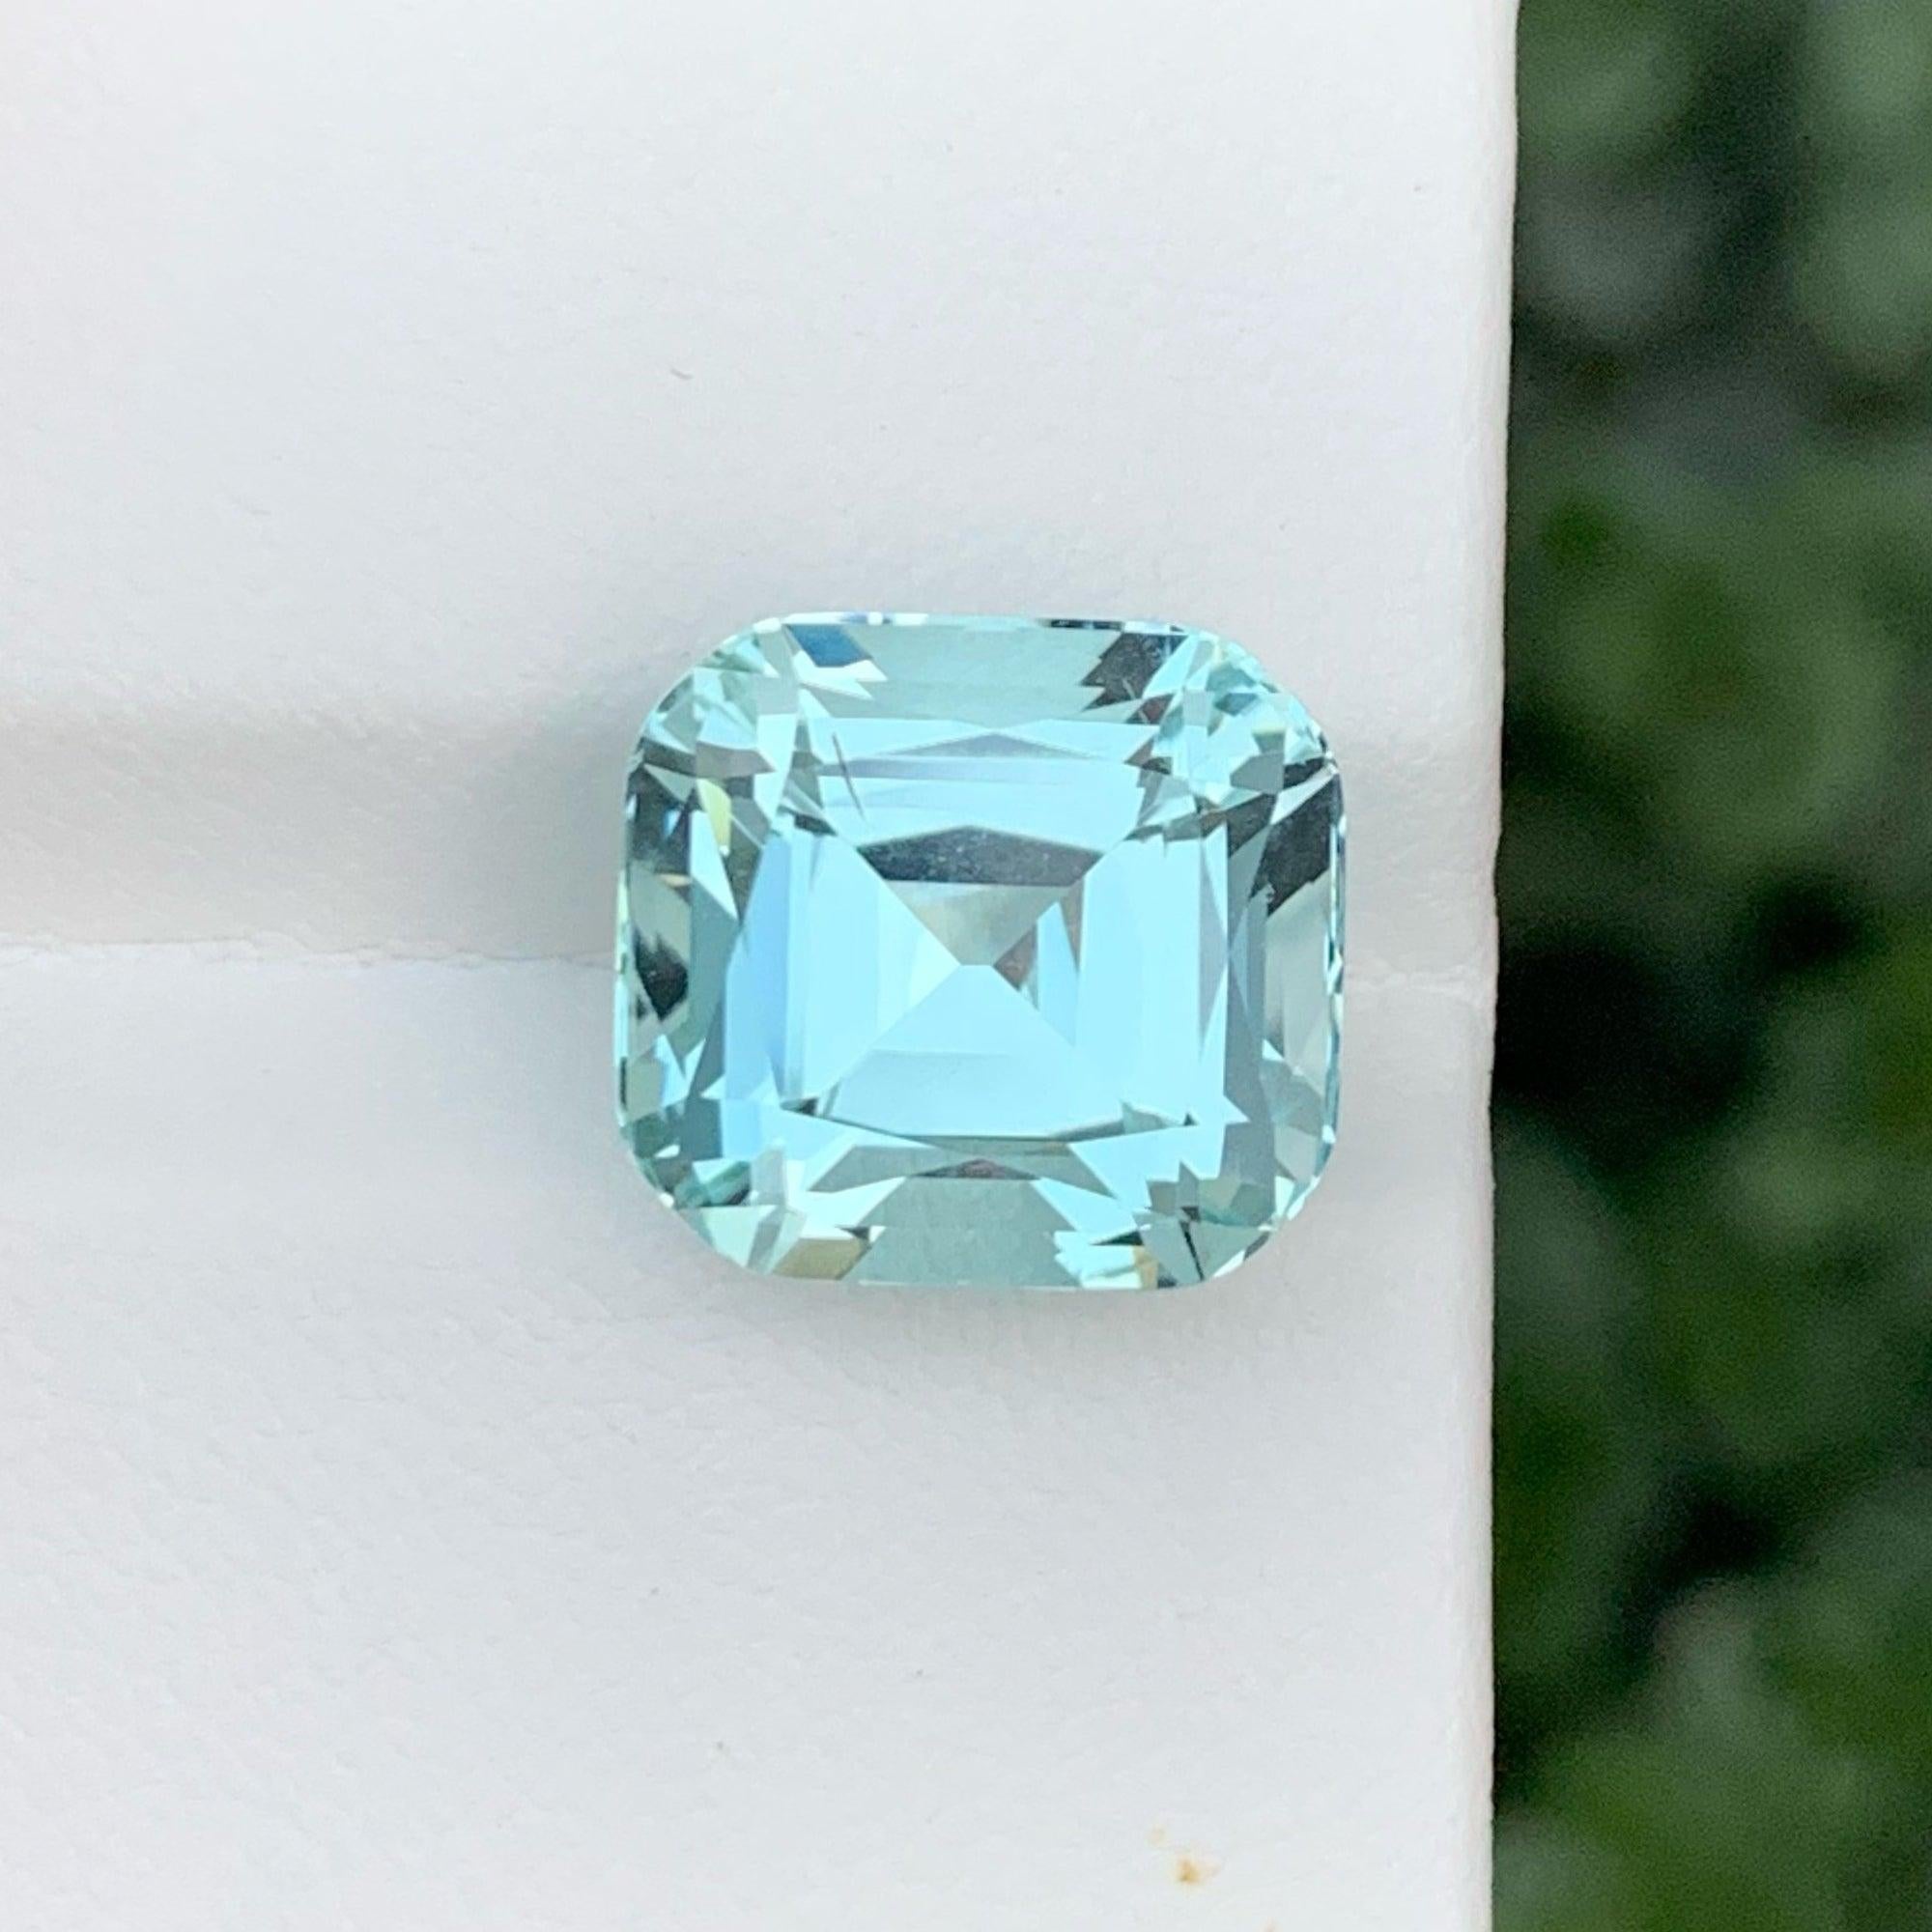 Elegant Natural Aquamarine Gemstone of 11.05 carats from Skardu,Pakistan has a wonderful cut in a Cushion shape, incredible Blue color, Great brilliance. This gem is VVS Clarity.

Product Information:
GEMSTONE NAME:  Elegant Natural Aquamarine